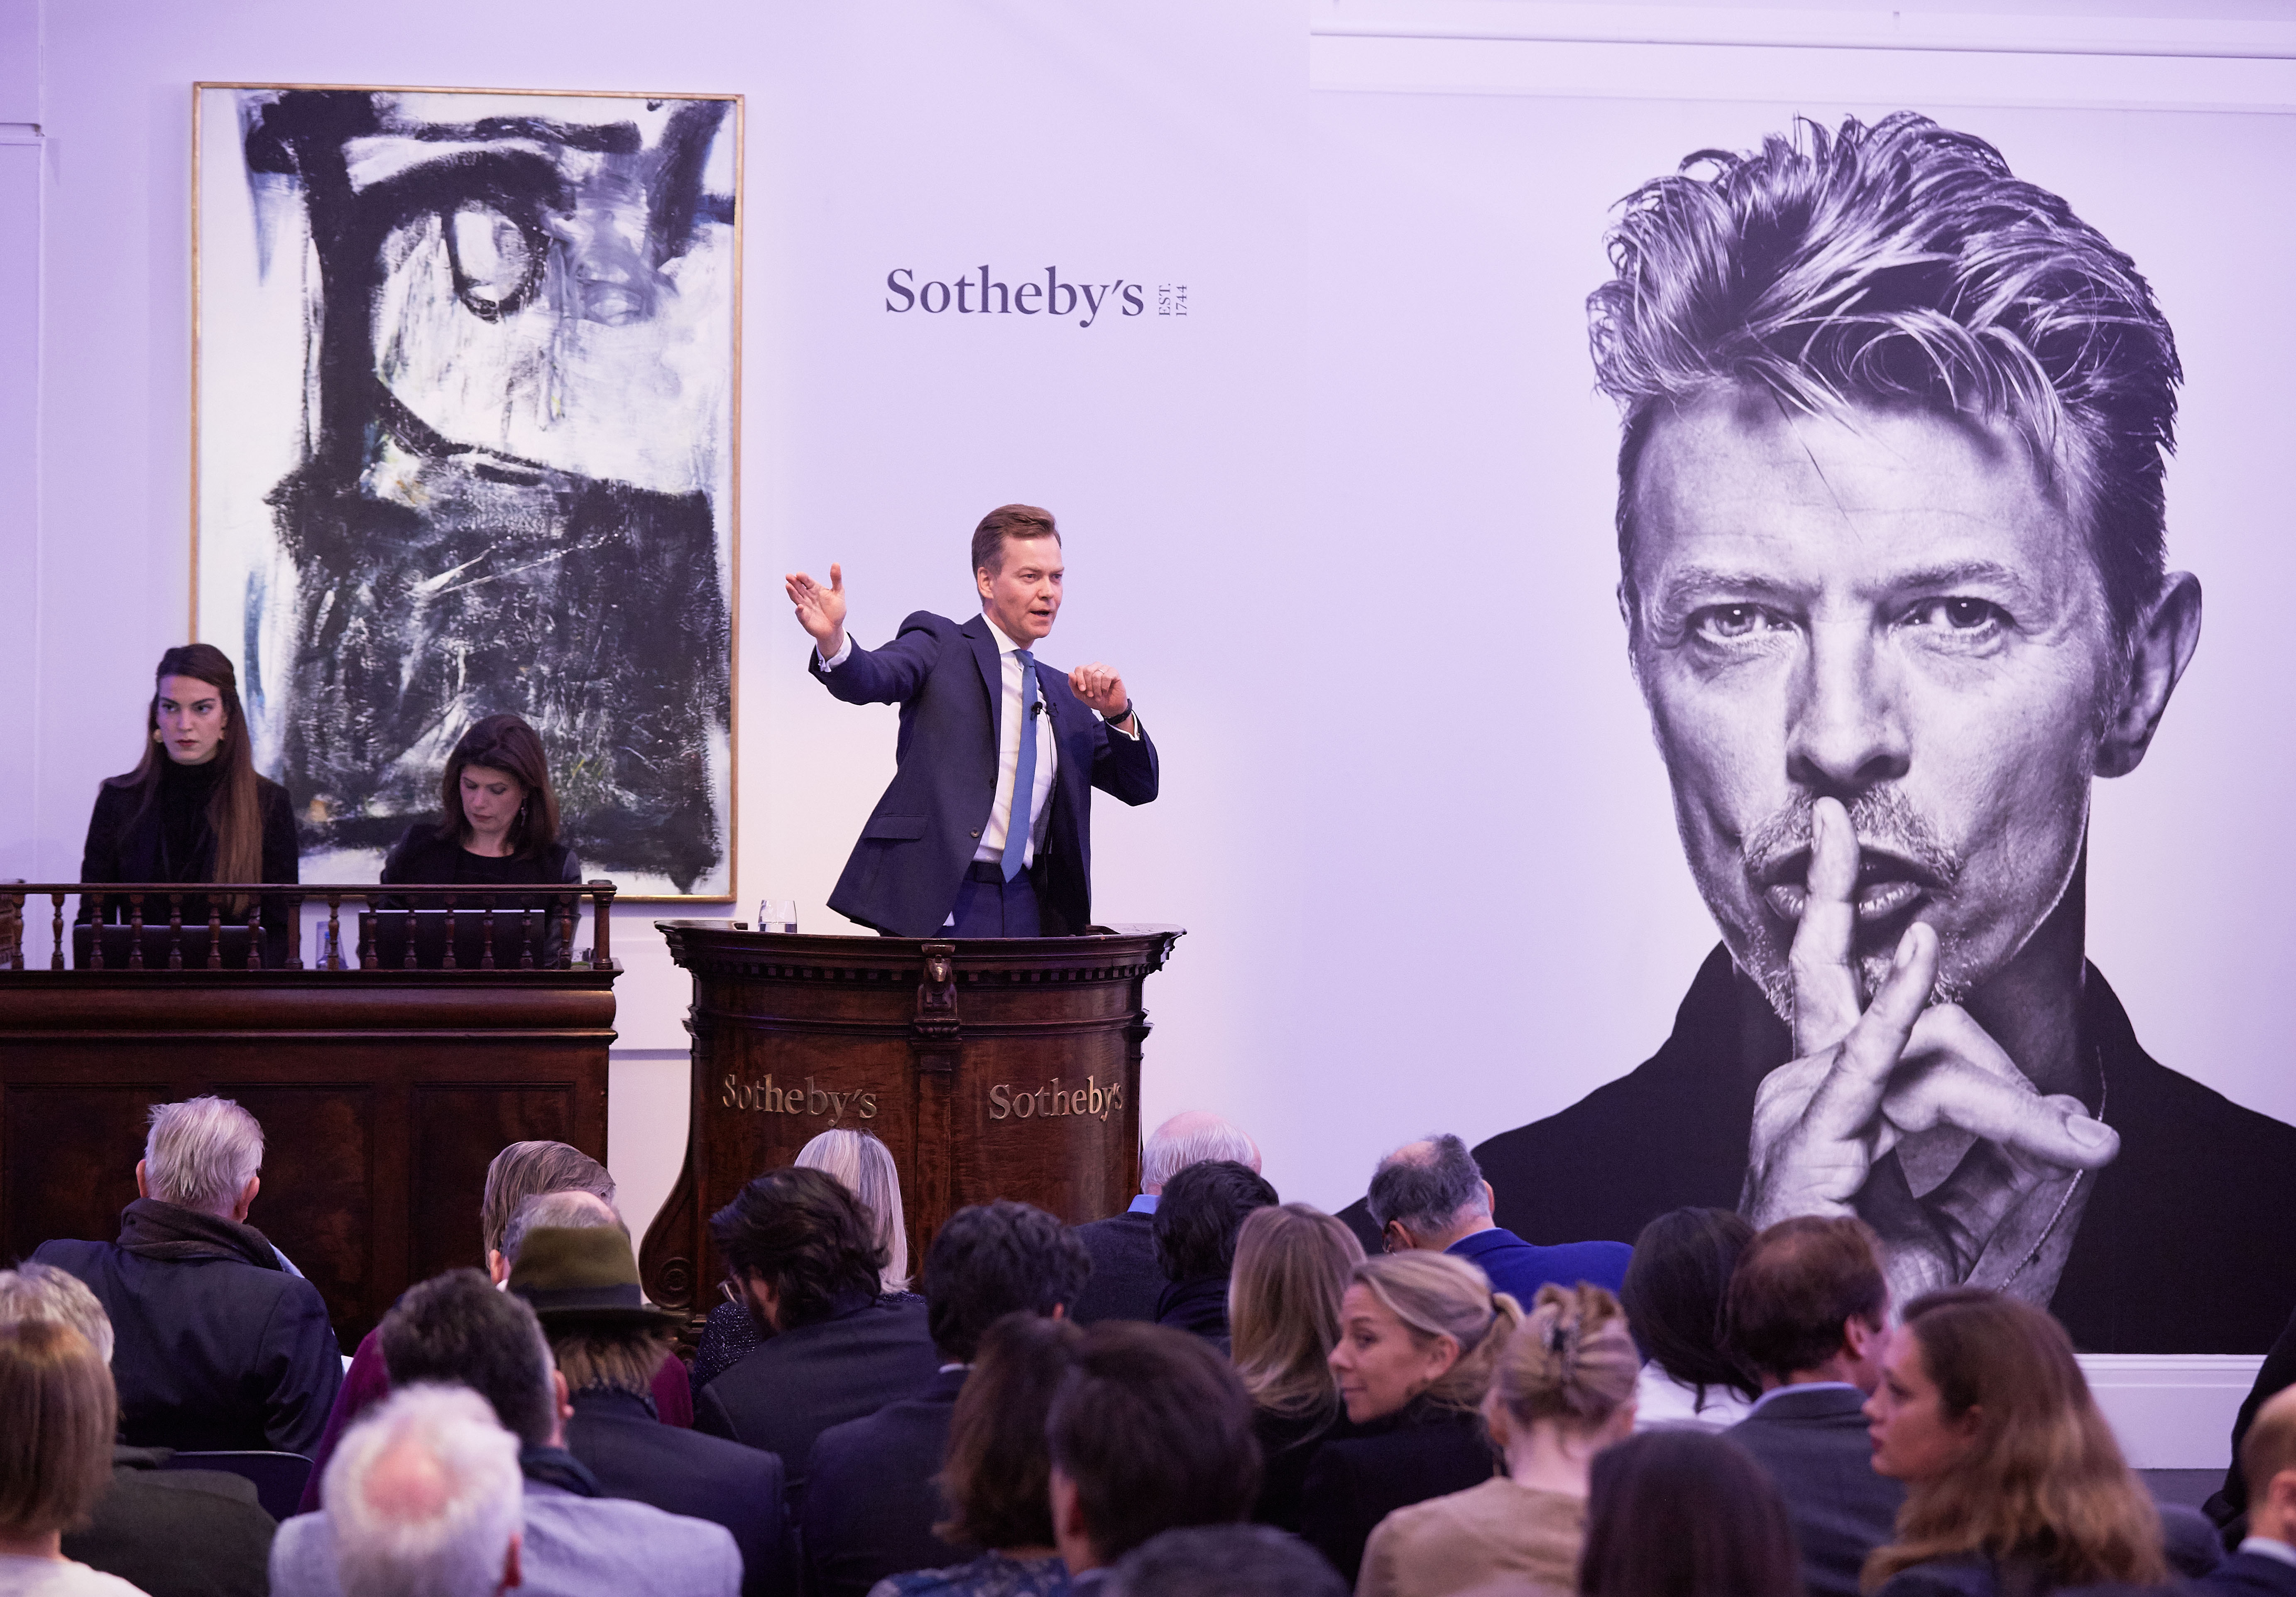 Sotheby's auctioned off the collection of David Bowie on November 10.